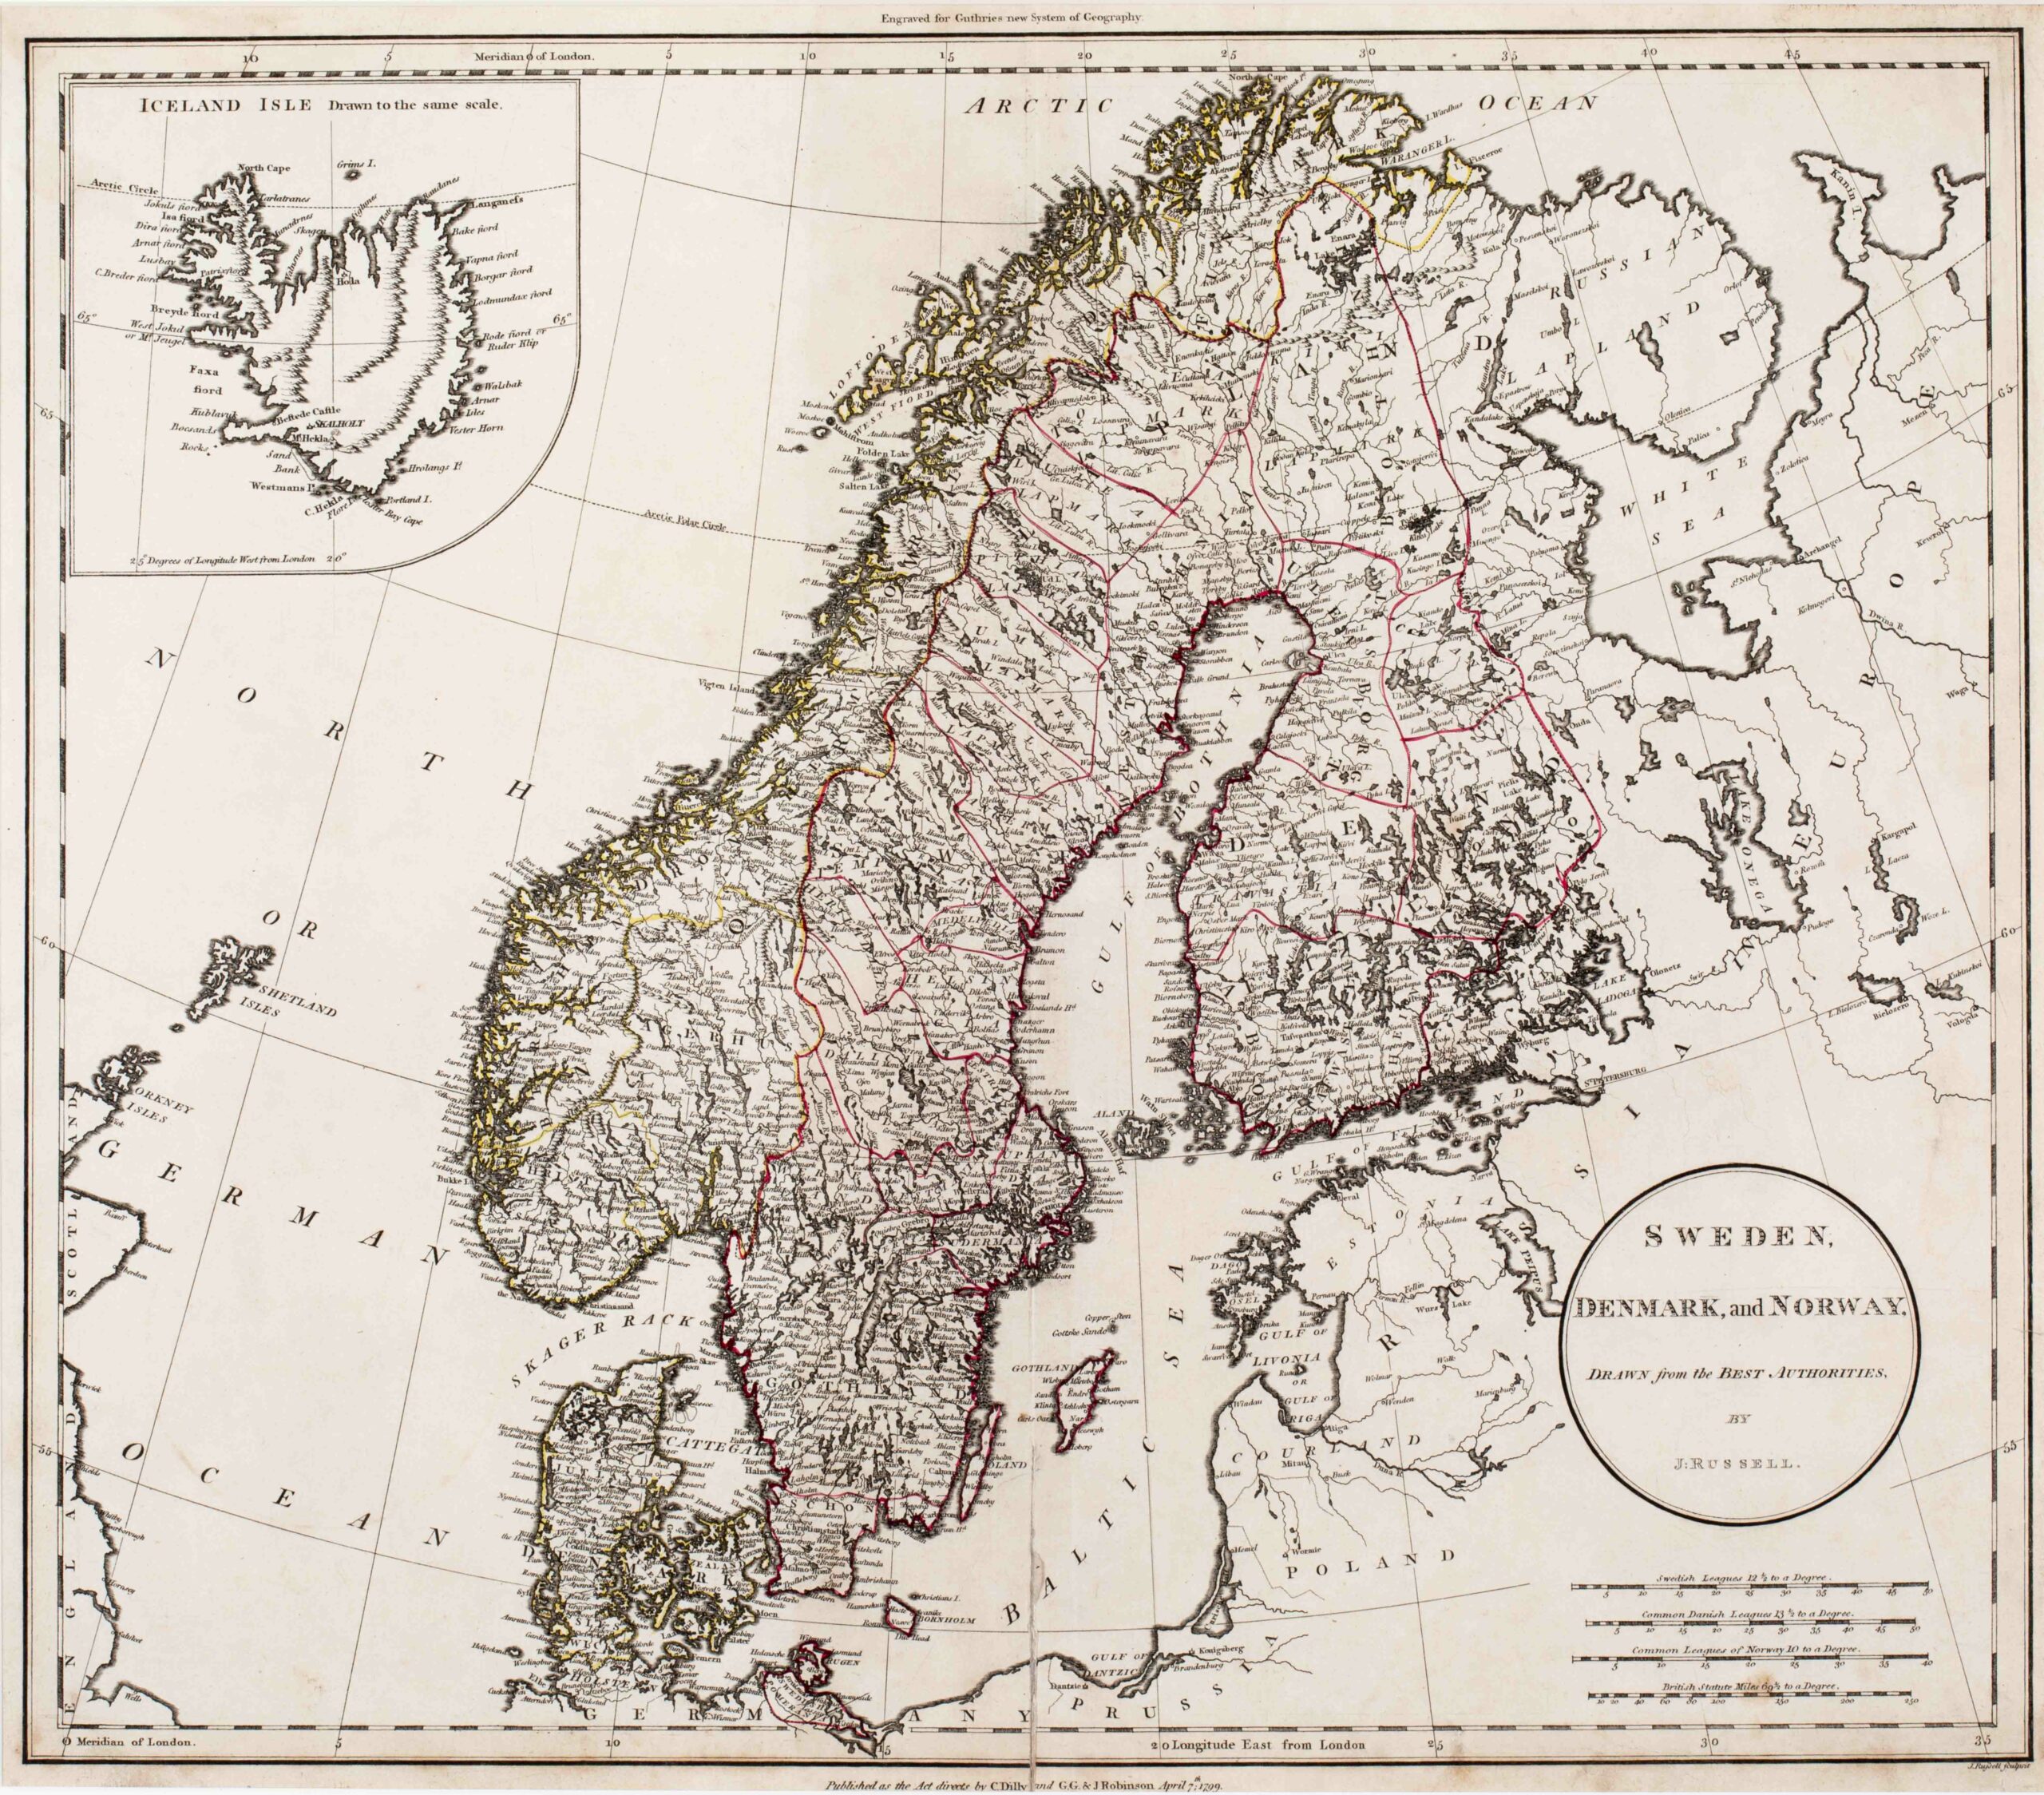 168. Sweden, Denmark and Norway drawn from the best authorities.